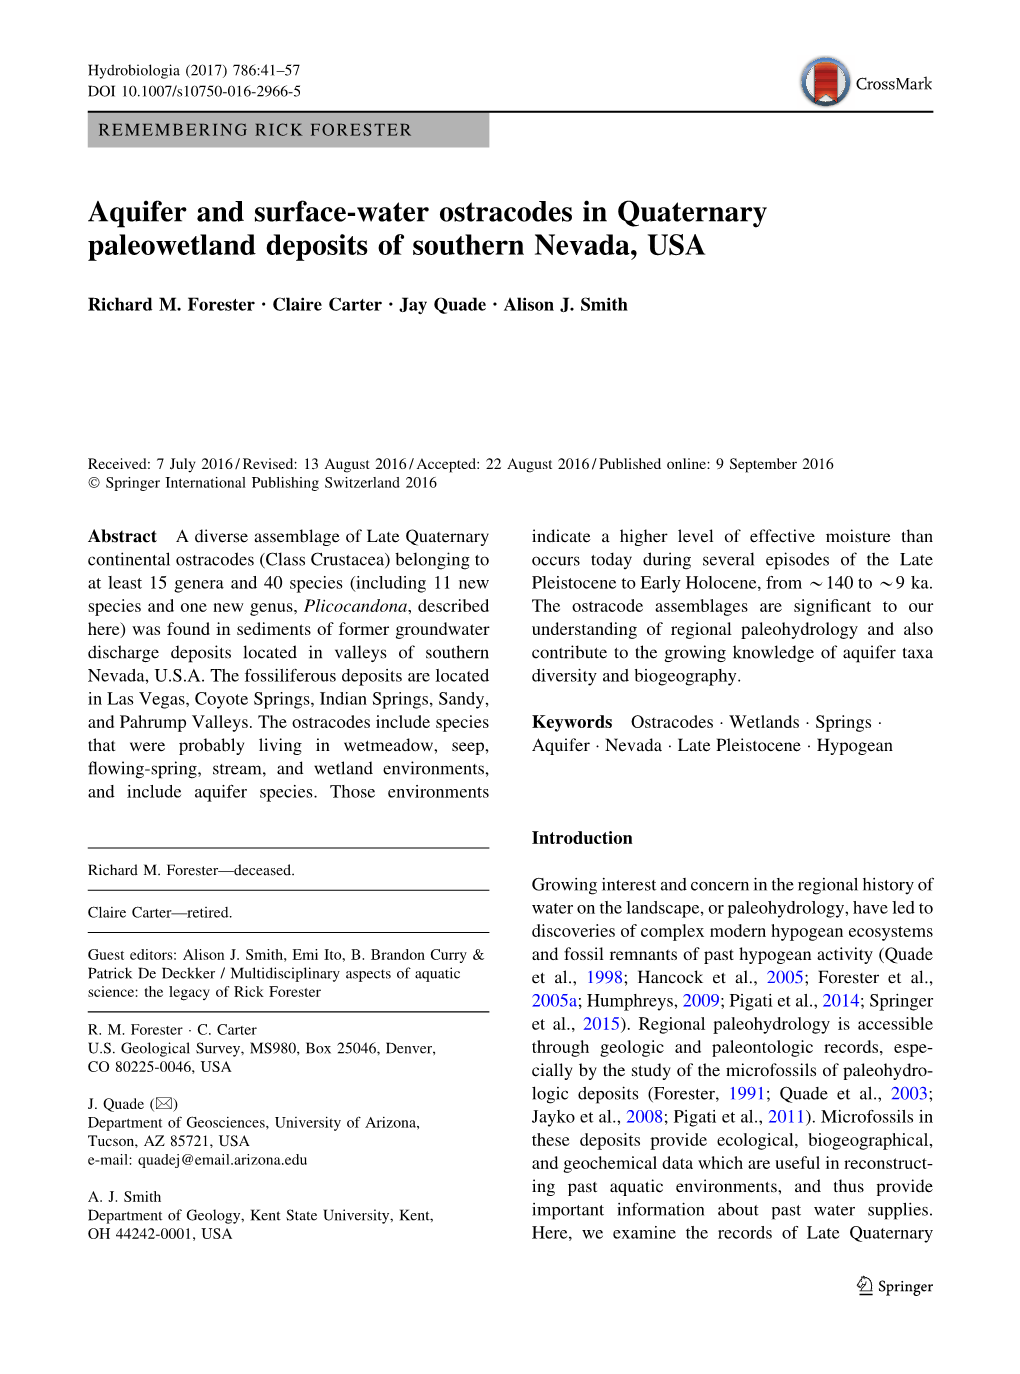 Aquifer and Surface-Water Ostracodes in Quaternary Paleowetland Deposits of Southern Nevada, USA